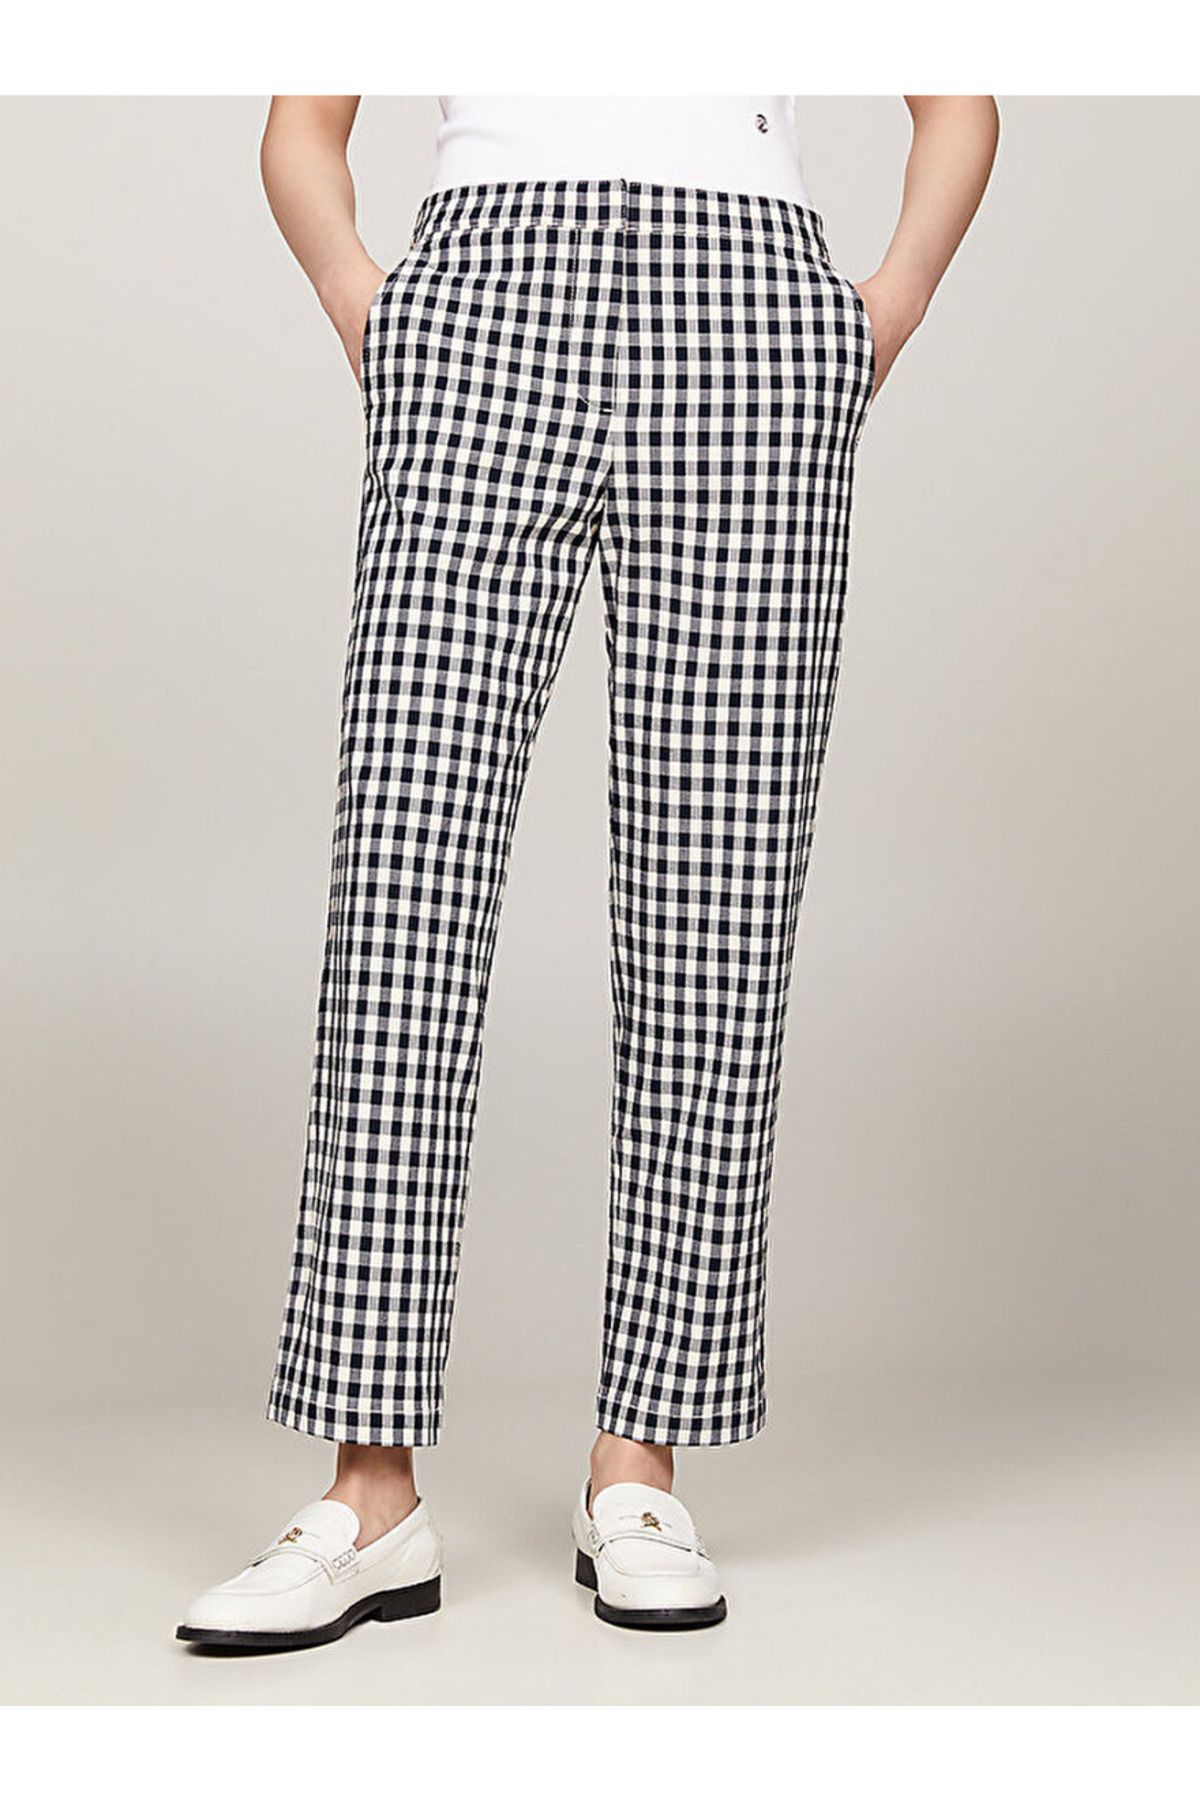 Tommy Hilfiger Gingham Slim Fit Straight Trousers